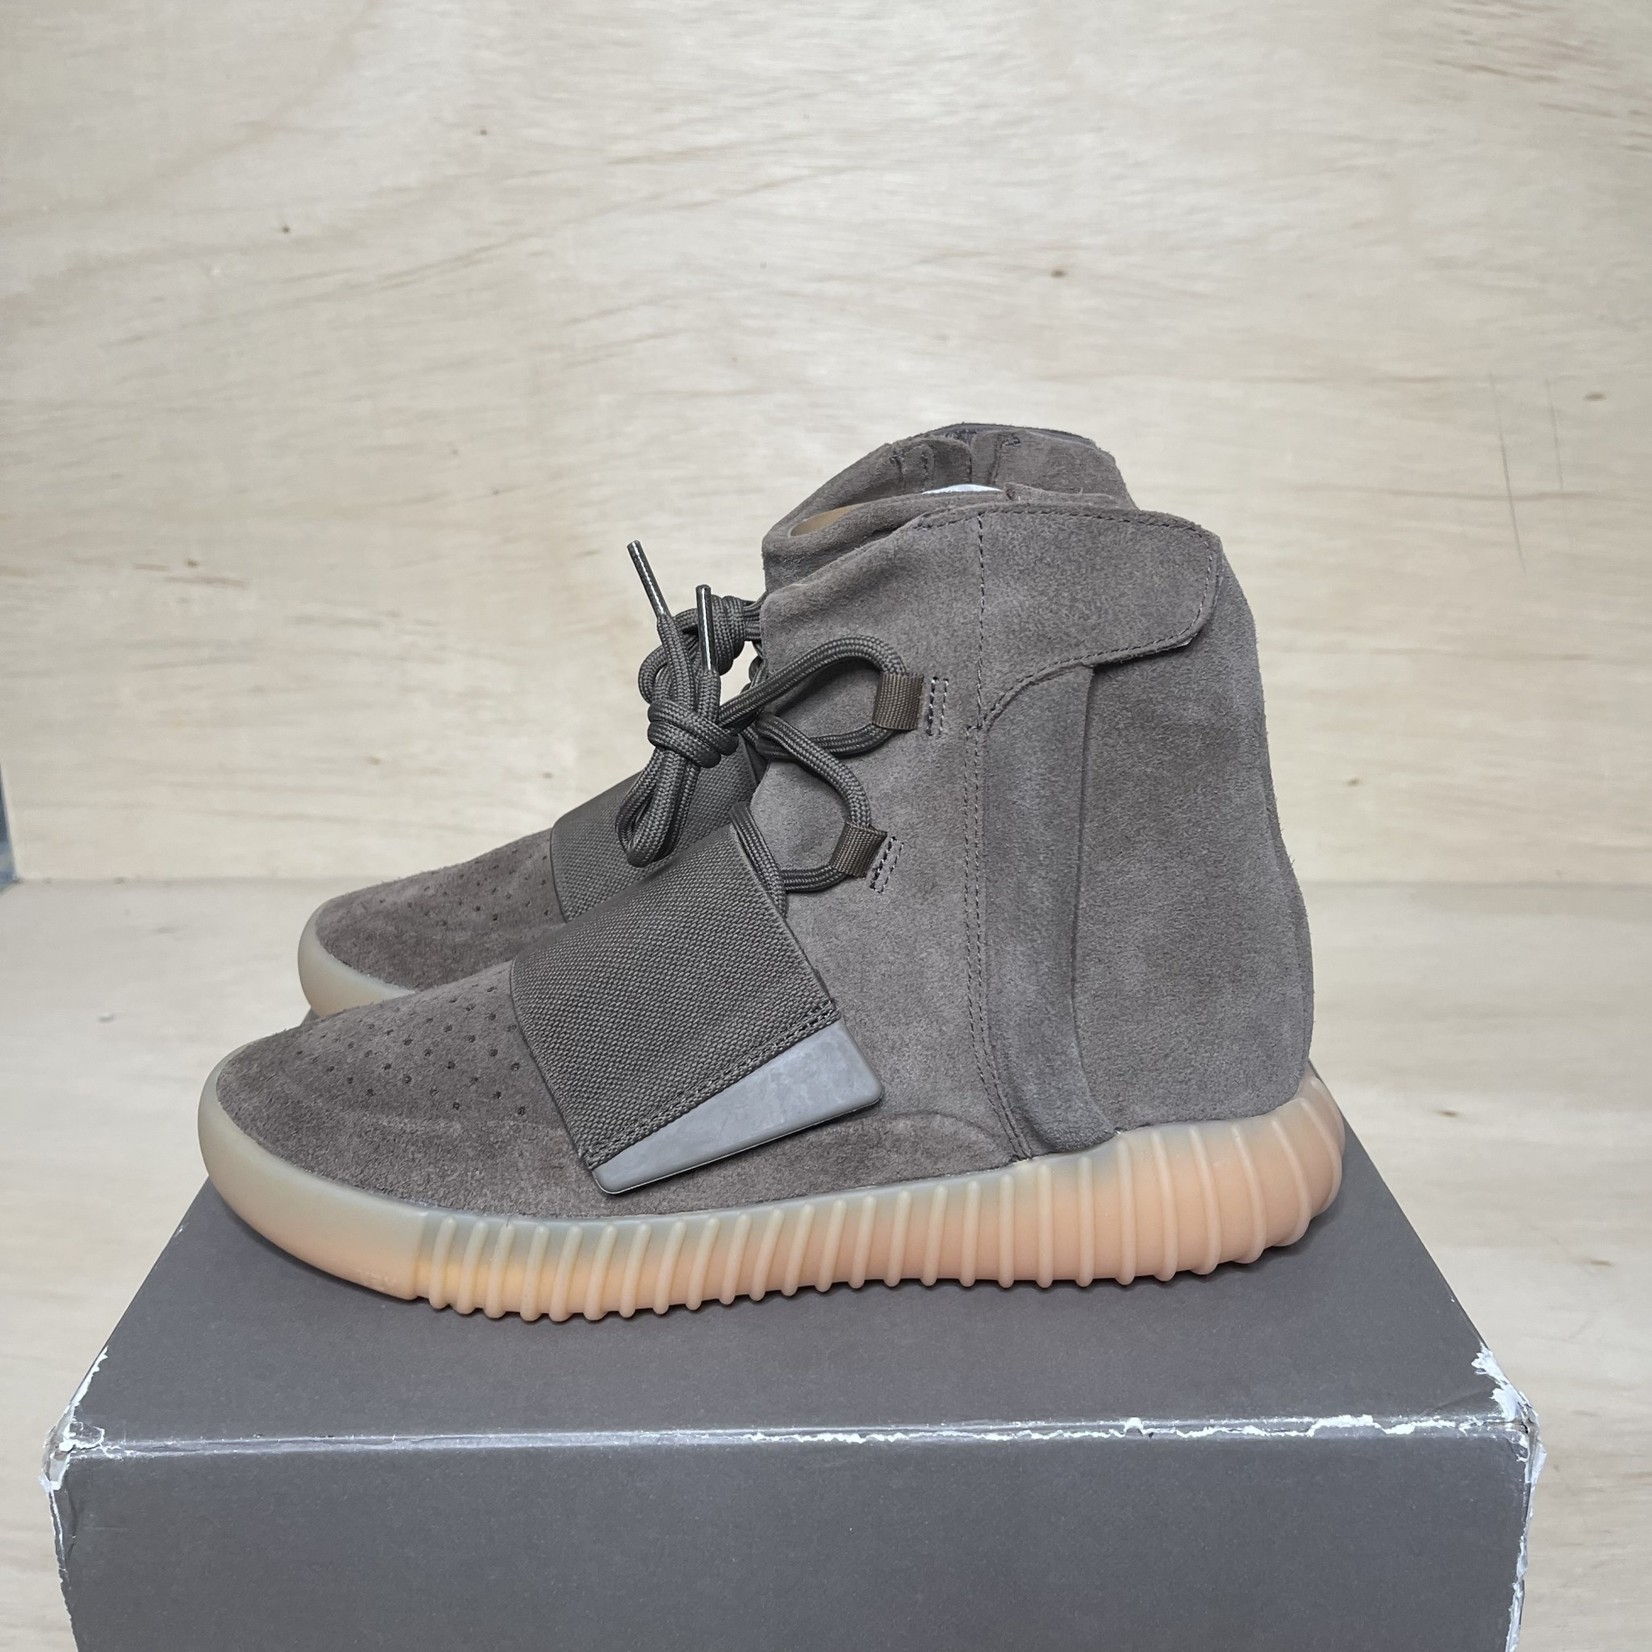 Adidas Adidas Yeezy Boost 750 Brown Size 7, DS BRAND NEW